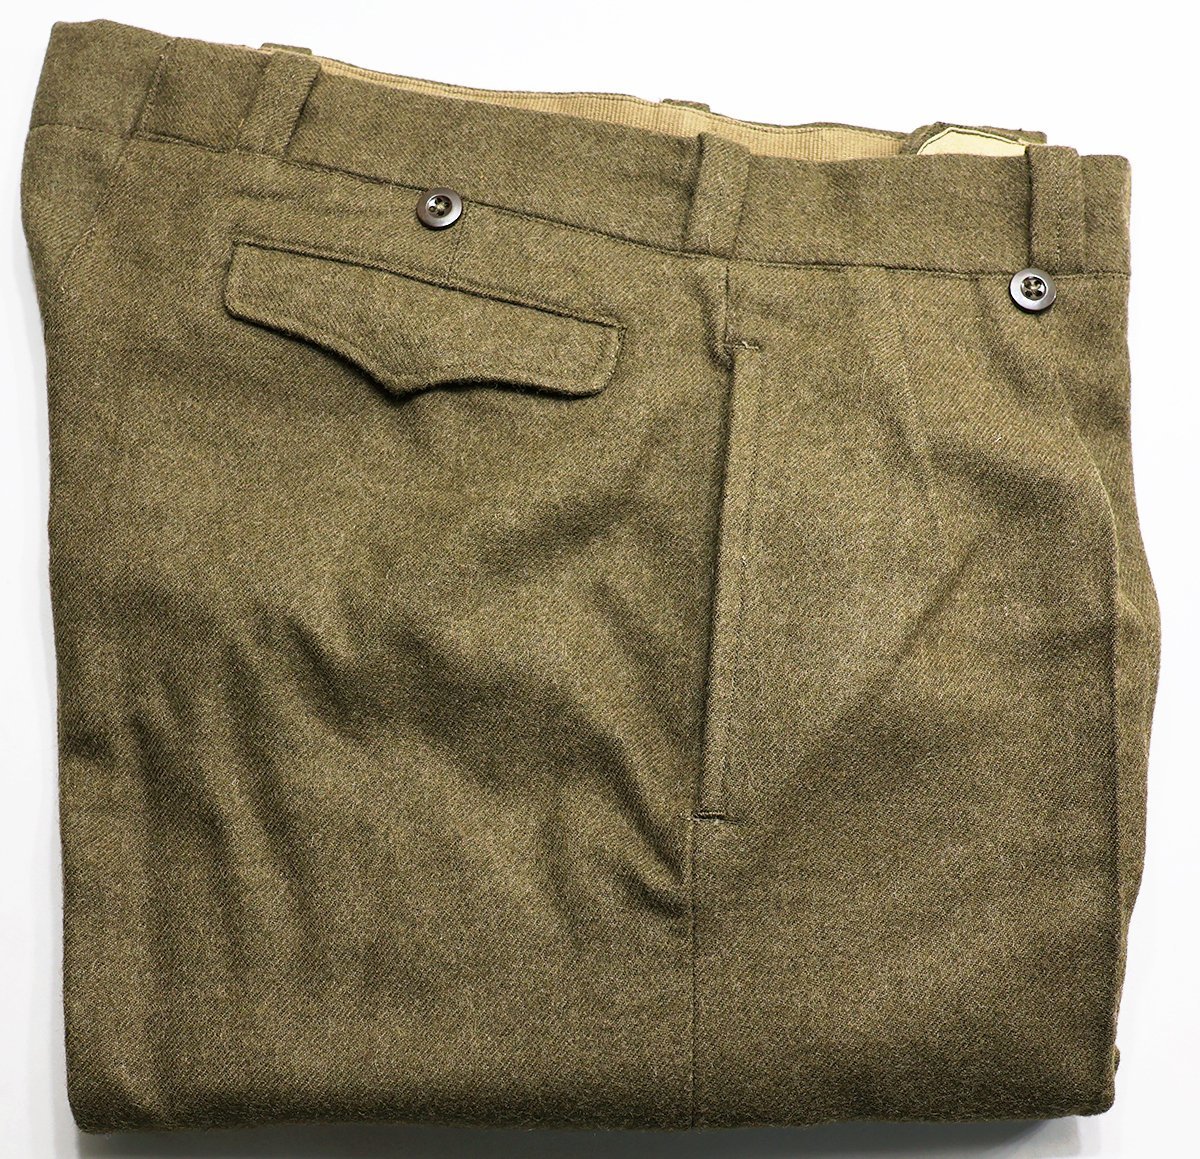 French Army ( France army ) 1950~60s M52 WOOL TROUSER / wool tiger u The - beautiful goods size 13 / French Army / pants / M-52